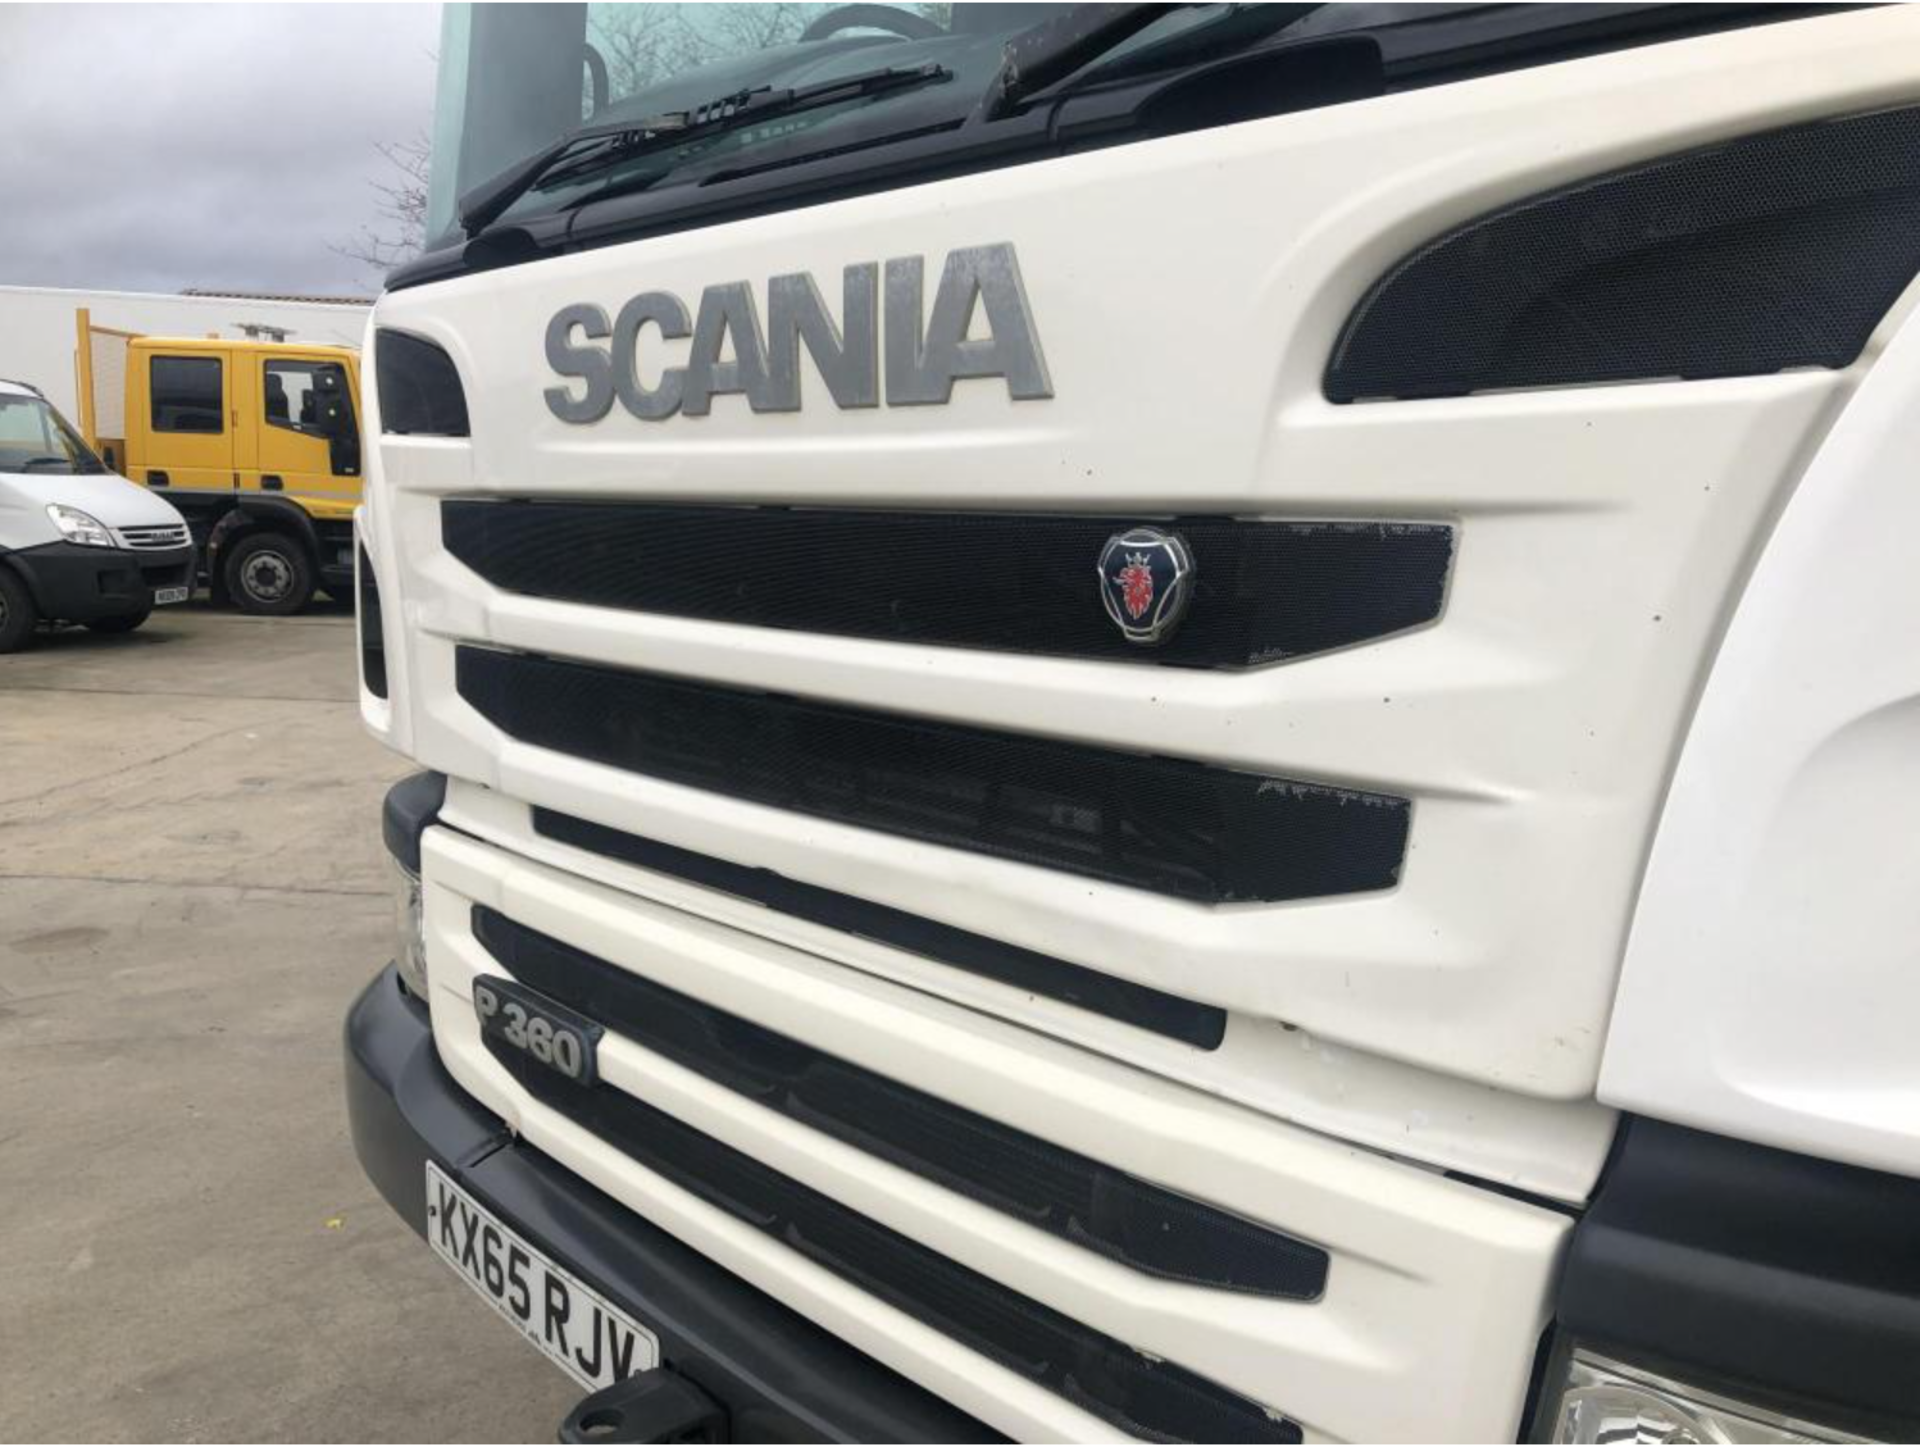 2015/65 PLATE SCANIA P360 8x4 ALLOY TIPPER WILCOX WILCO LIGHT BODY HYVA TIPPING GEAR *PLUS VAT* - Image 5 of 16